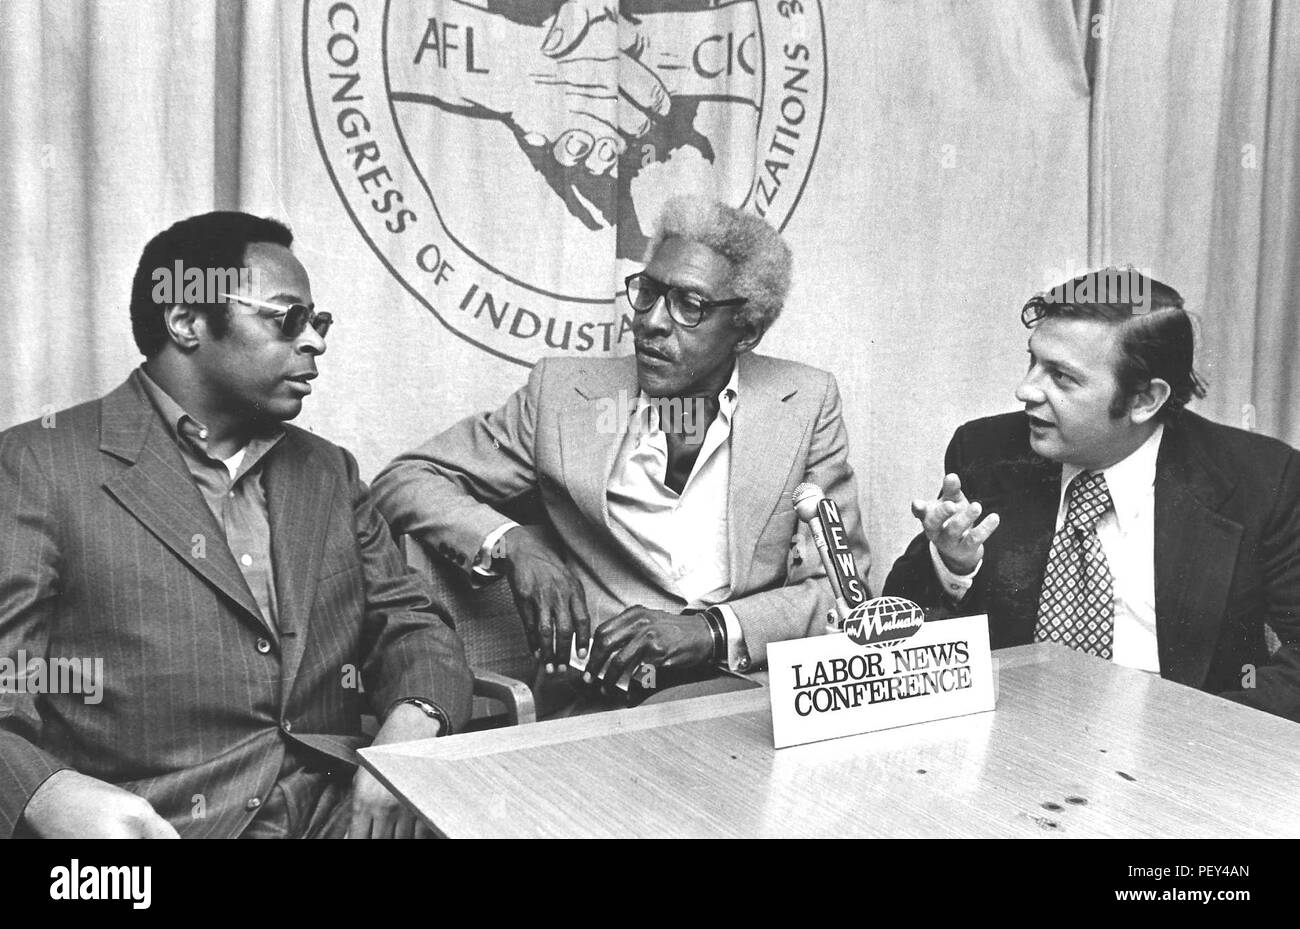 Paul Delaney, left, and Washington Star colleague Ron Sarro, far right, interview the late gay civil rights activist Baynard Rustin, center, in 1968 at The American Federation of Labor and Congress of Industrial Organizations headquarters in Washington, D.C., to discuss the Poor People’s Campaign in the wake of the assassination of Dr. Martin Luther King, Jr. “Anyone interested in journalism must be bold, daring, and ready to take the challenge,” Delaney said. “The military taught me early not to have fear, that it is part of some men and women’s DNA.” (Photo courtesy of Paul Delaney) Stock Photo